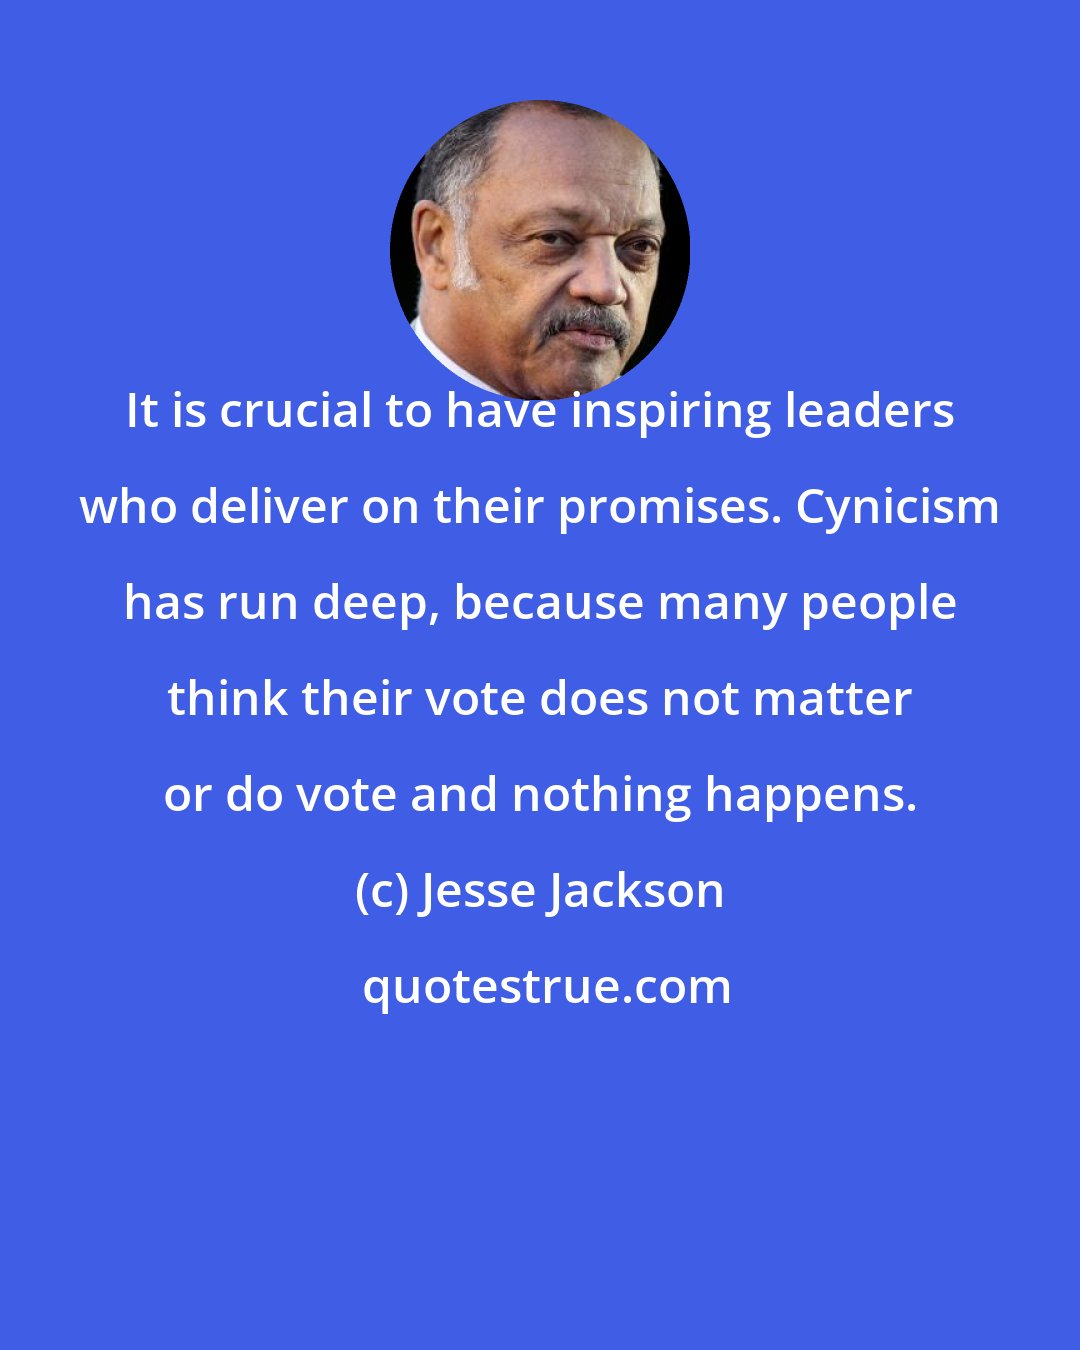 Jesse Jackson: It is crucial to have inspiring leaders who deliver on their promises. Cynicism has run deep, because many people think their vote does not matter or do vote and nothing happens.